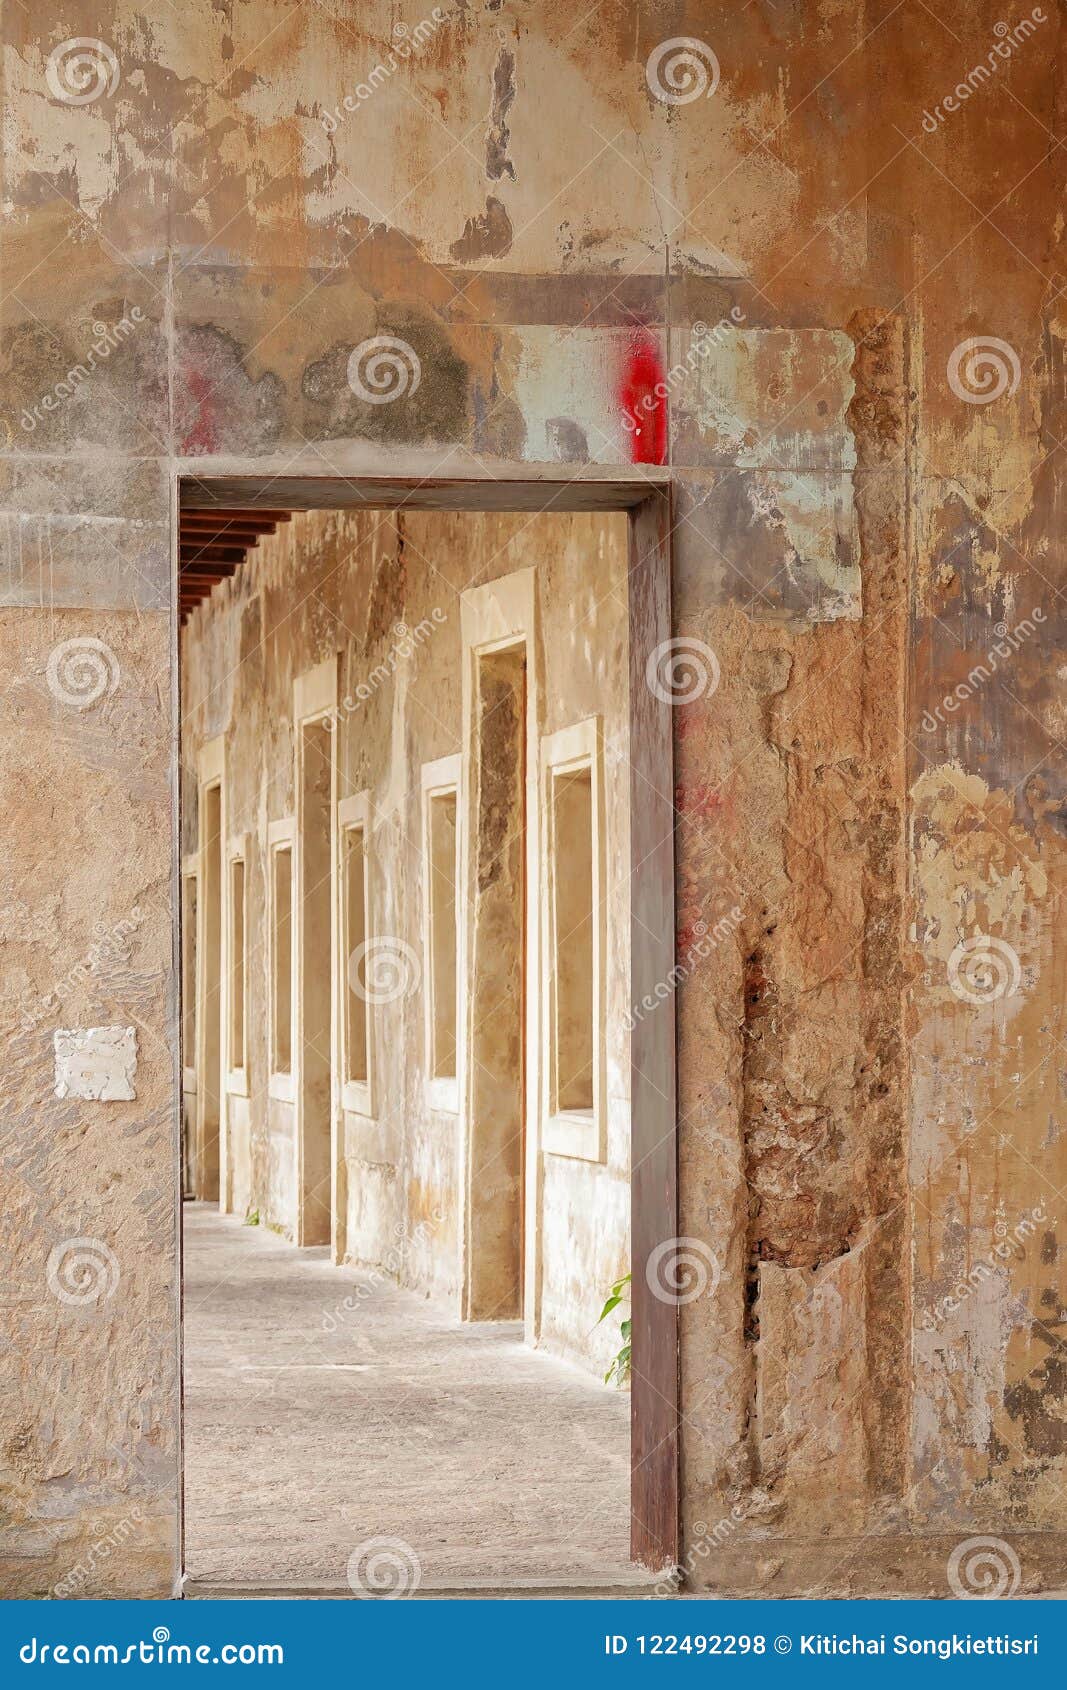 Old Wooden Door Frame In Cement Wall The House Interior